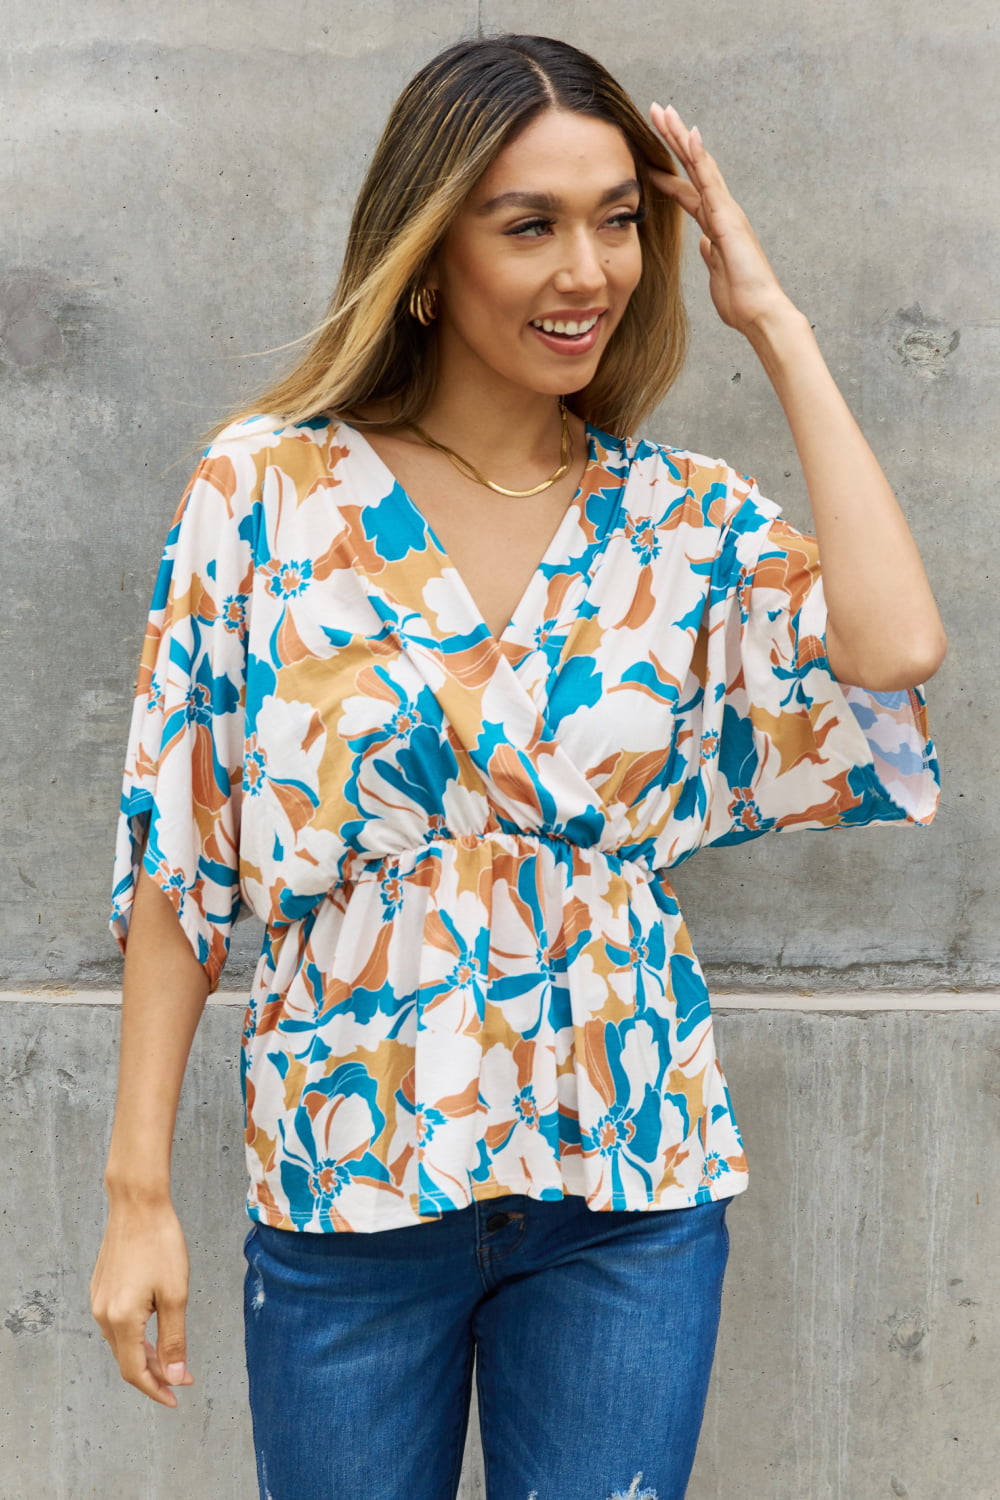 BOMBOM Floral Print Wrap Tunic Top - Online Only